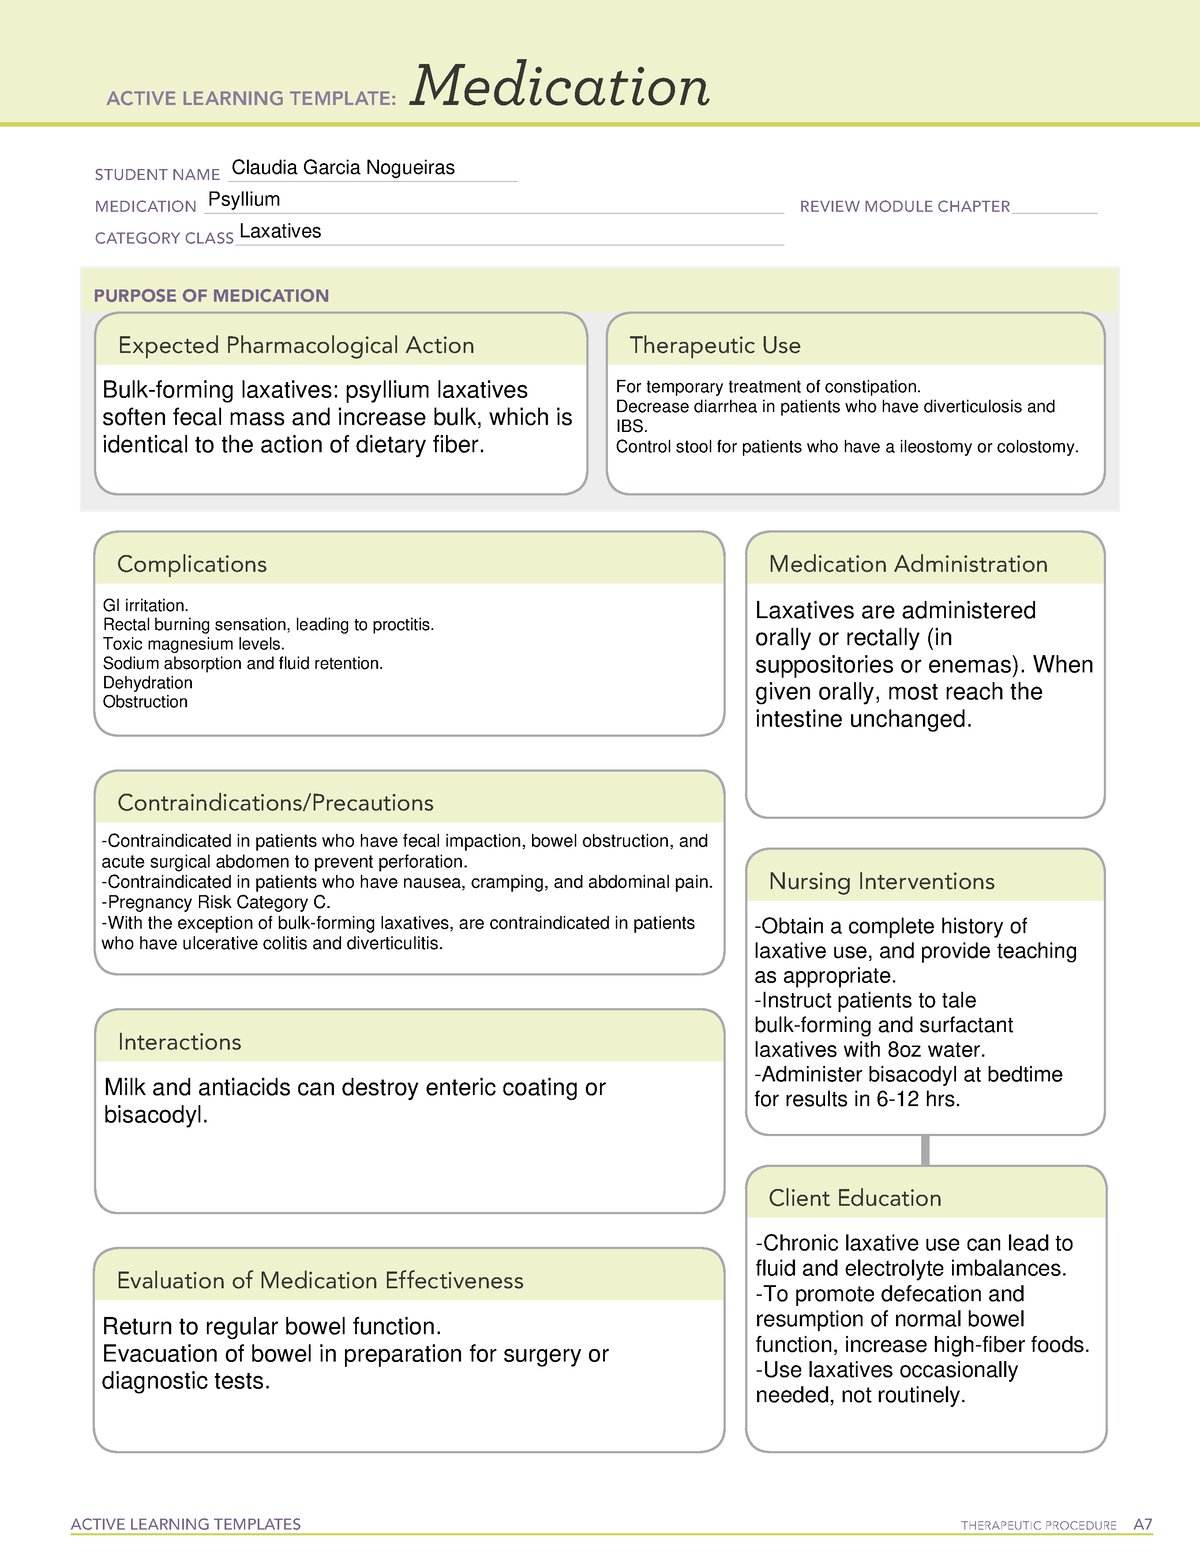 laxatives-medication-templates-gi-meds-active-learning-templates